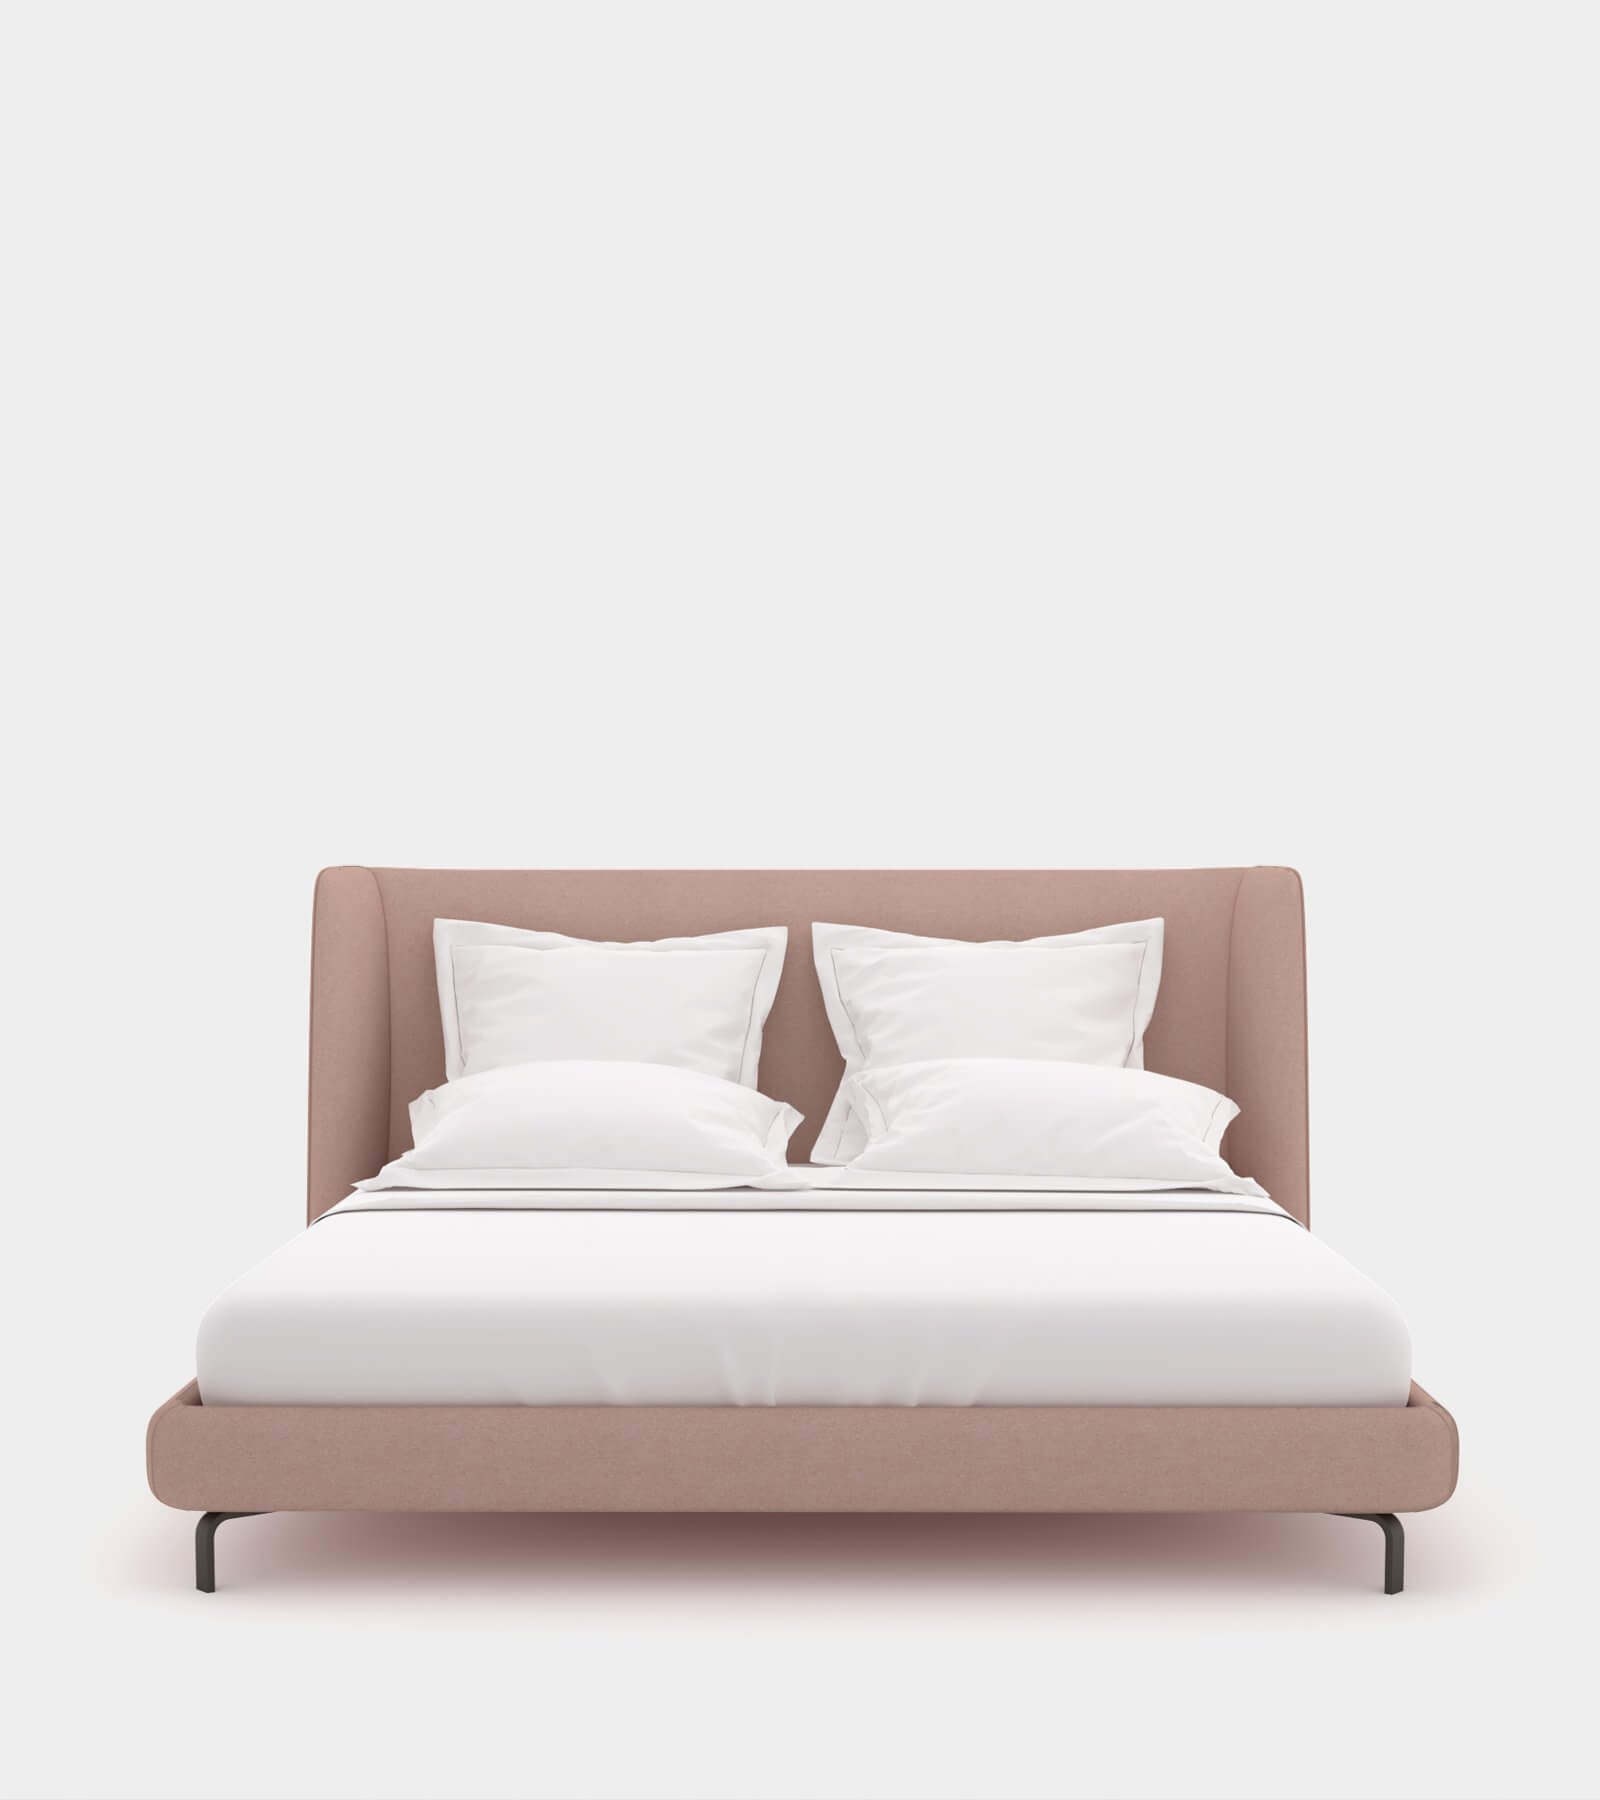 Bed with round headboard 1 - 3D Model